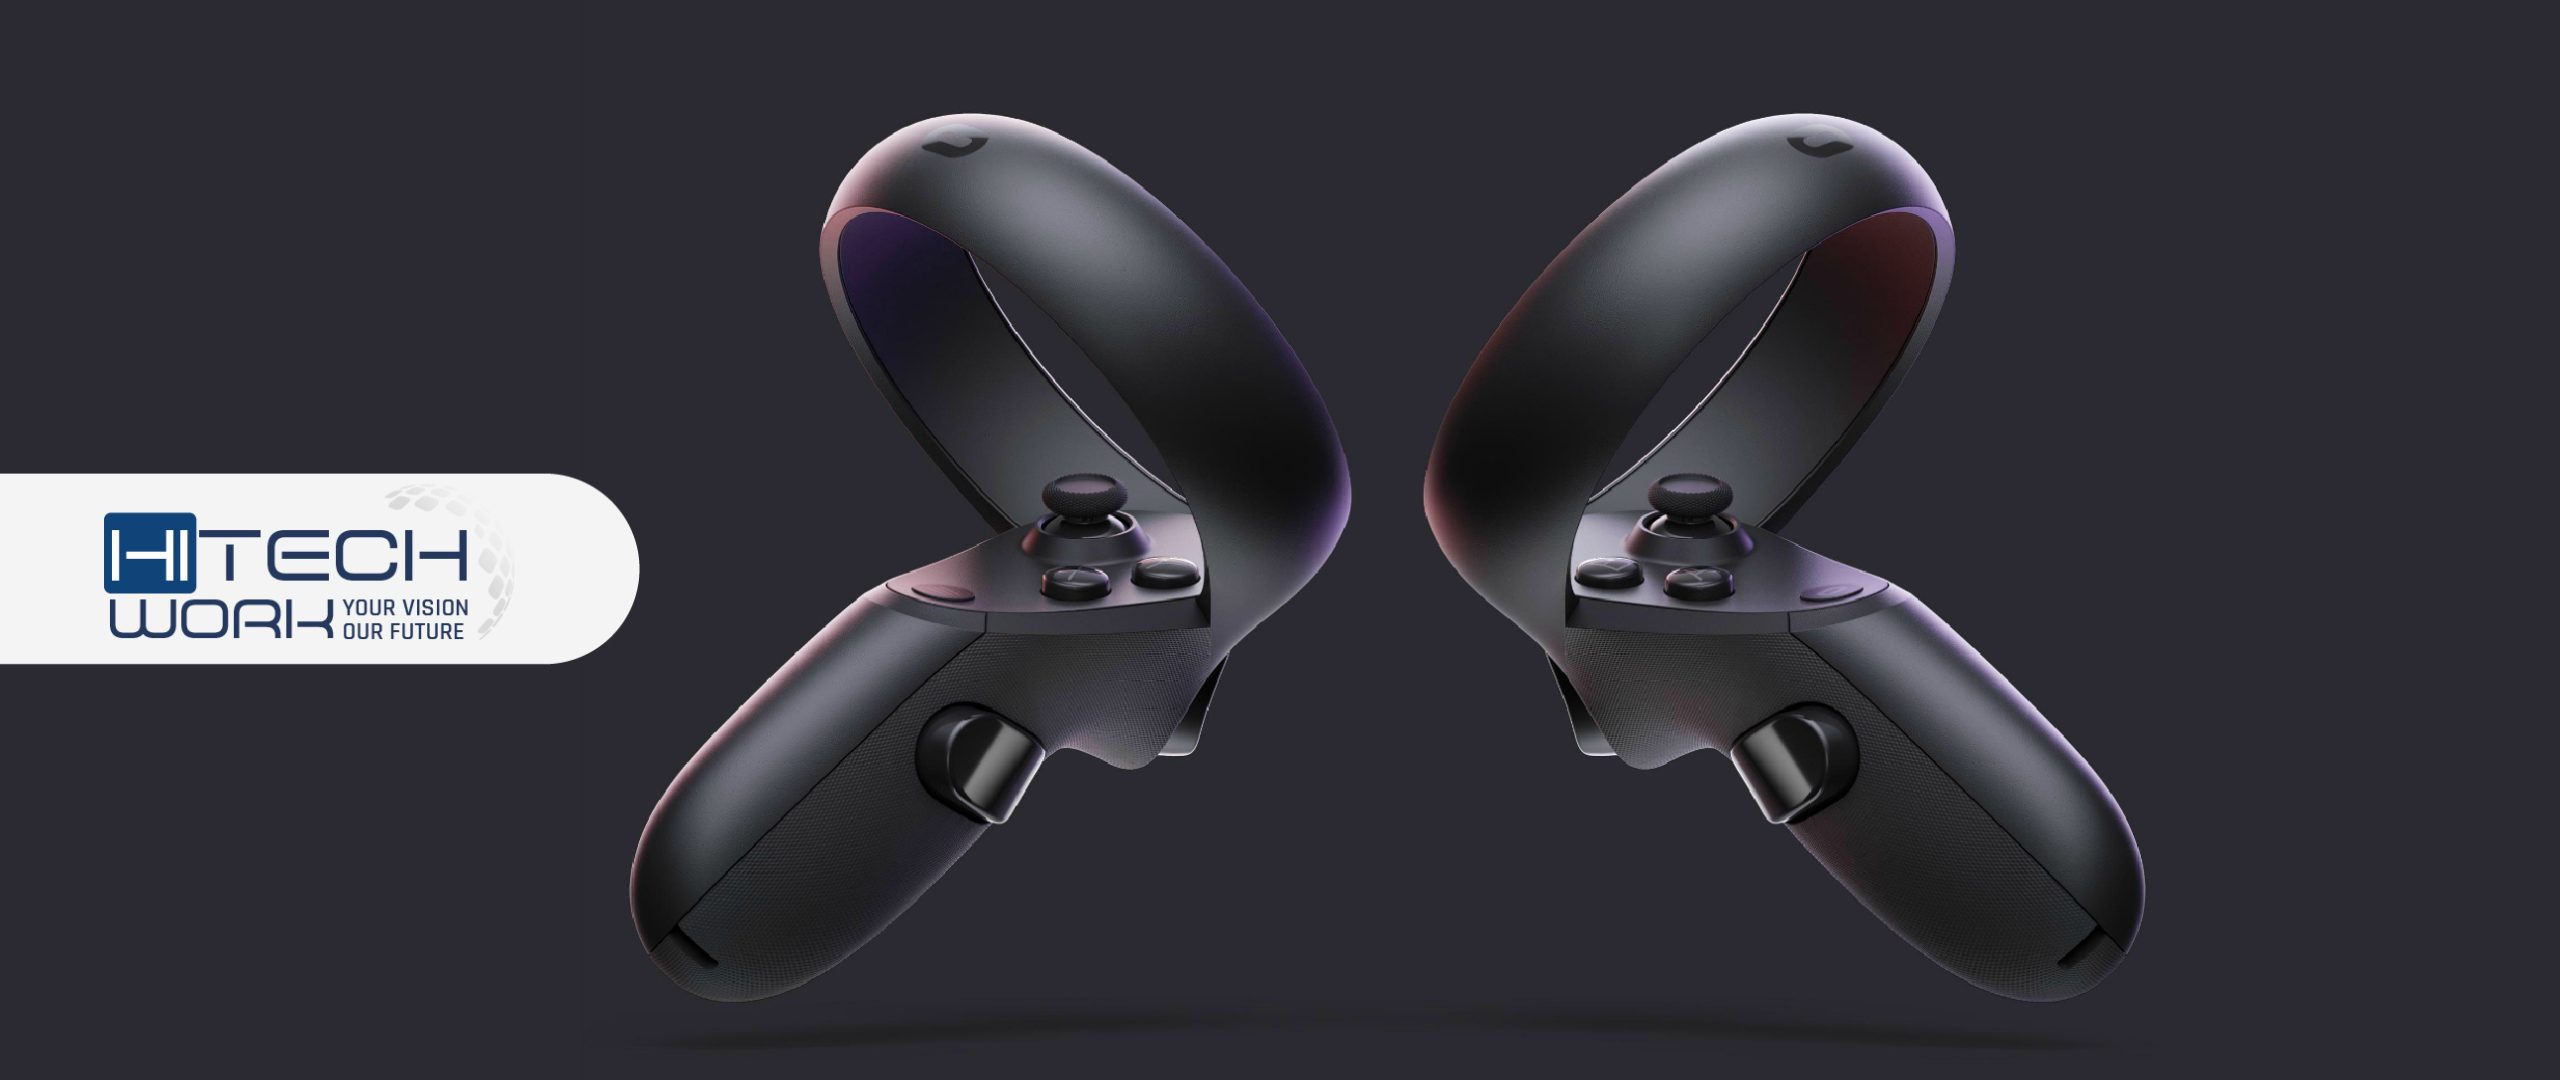 Charge Oculus Quest controllers